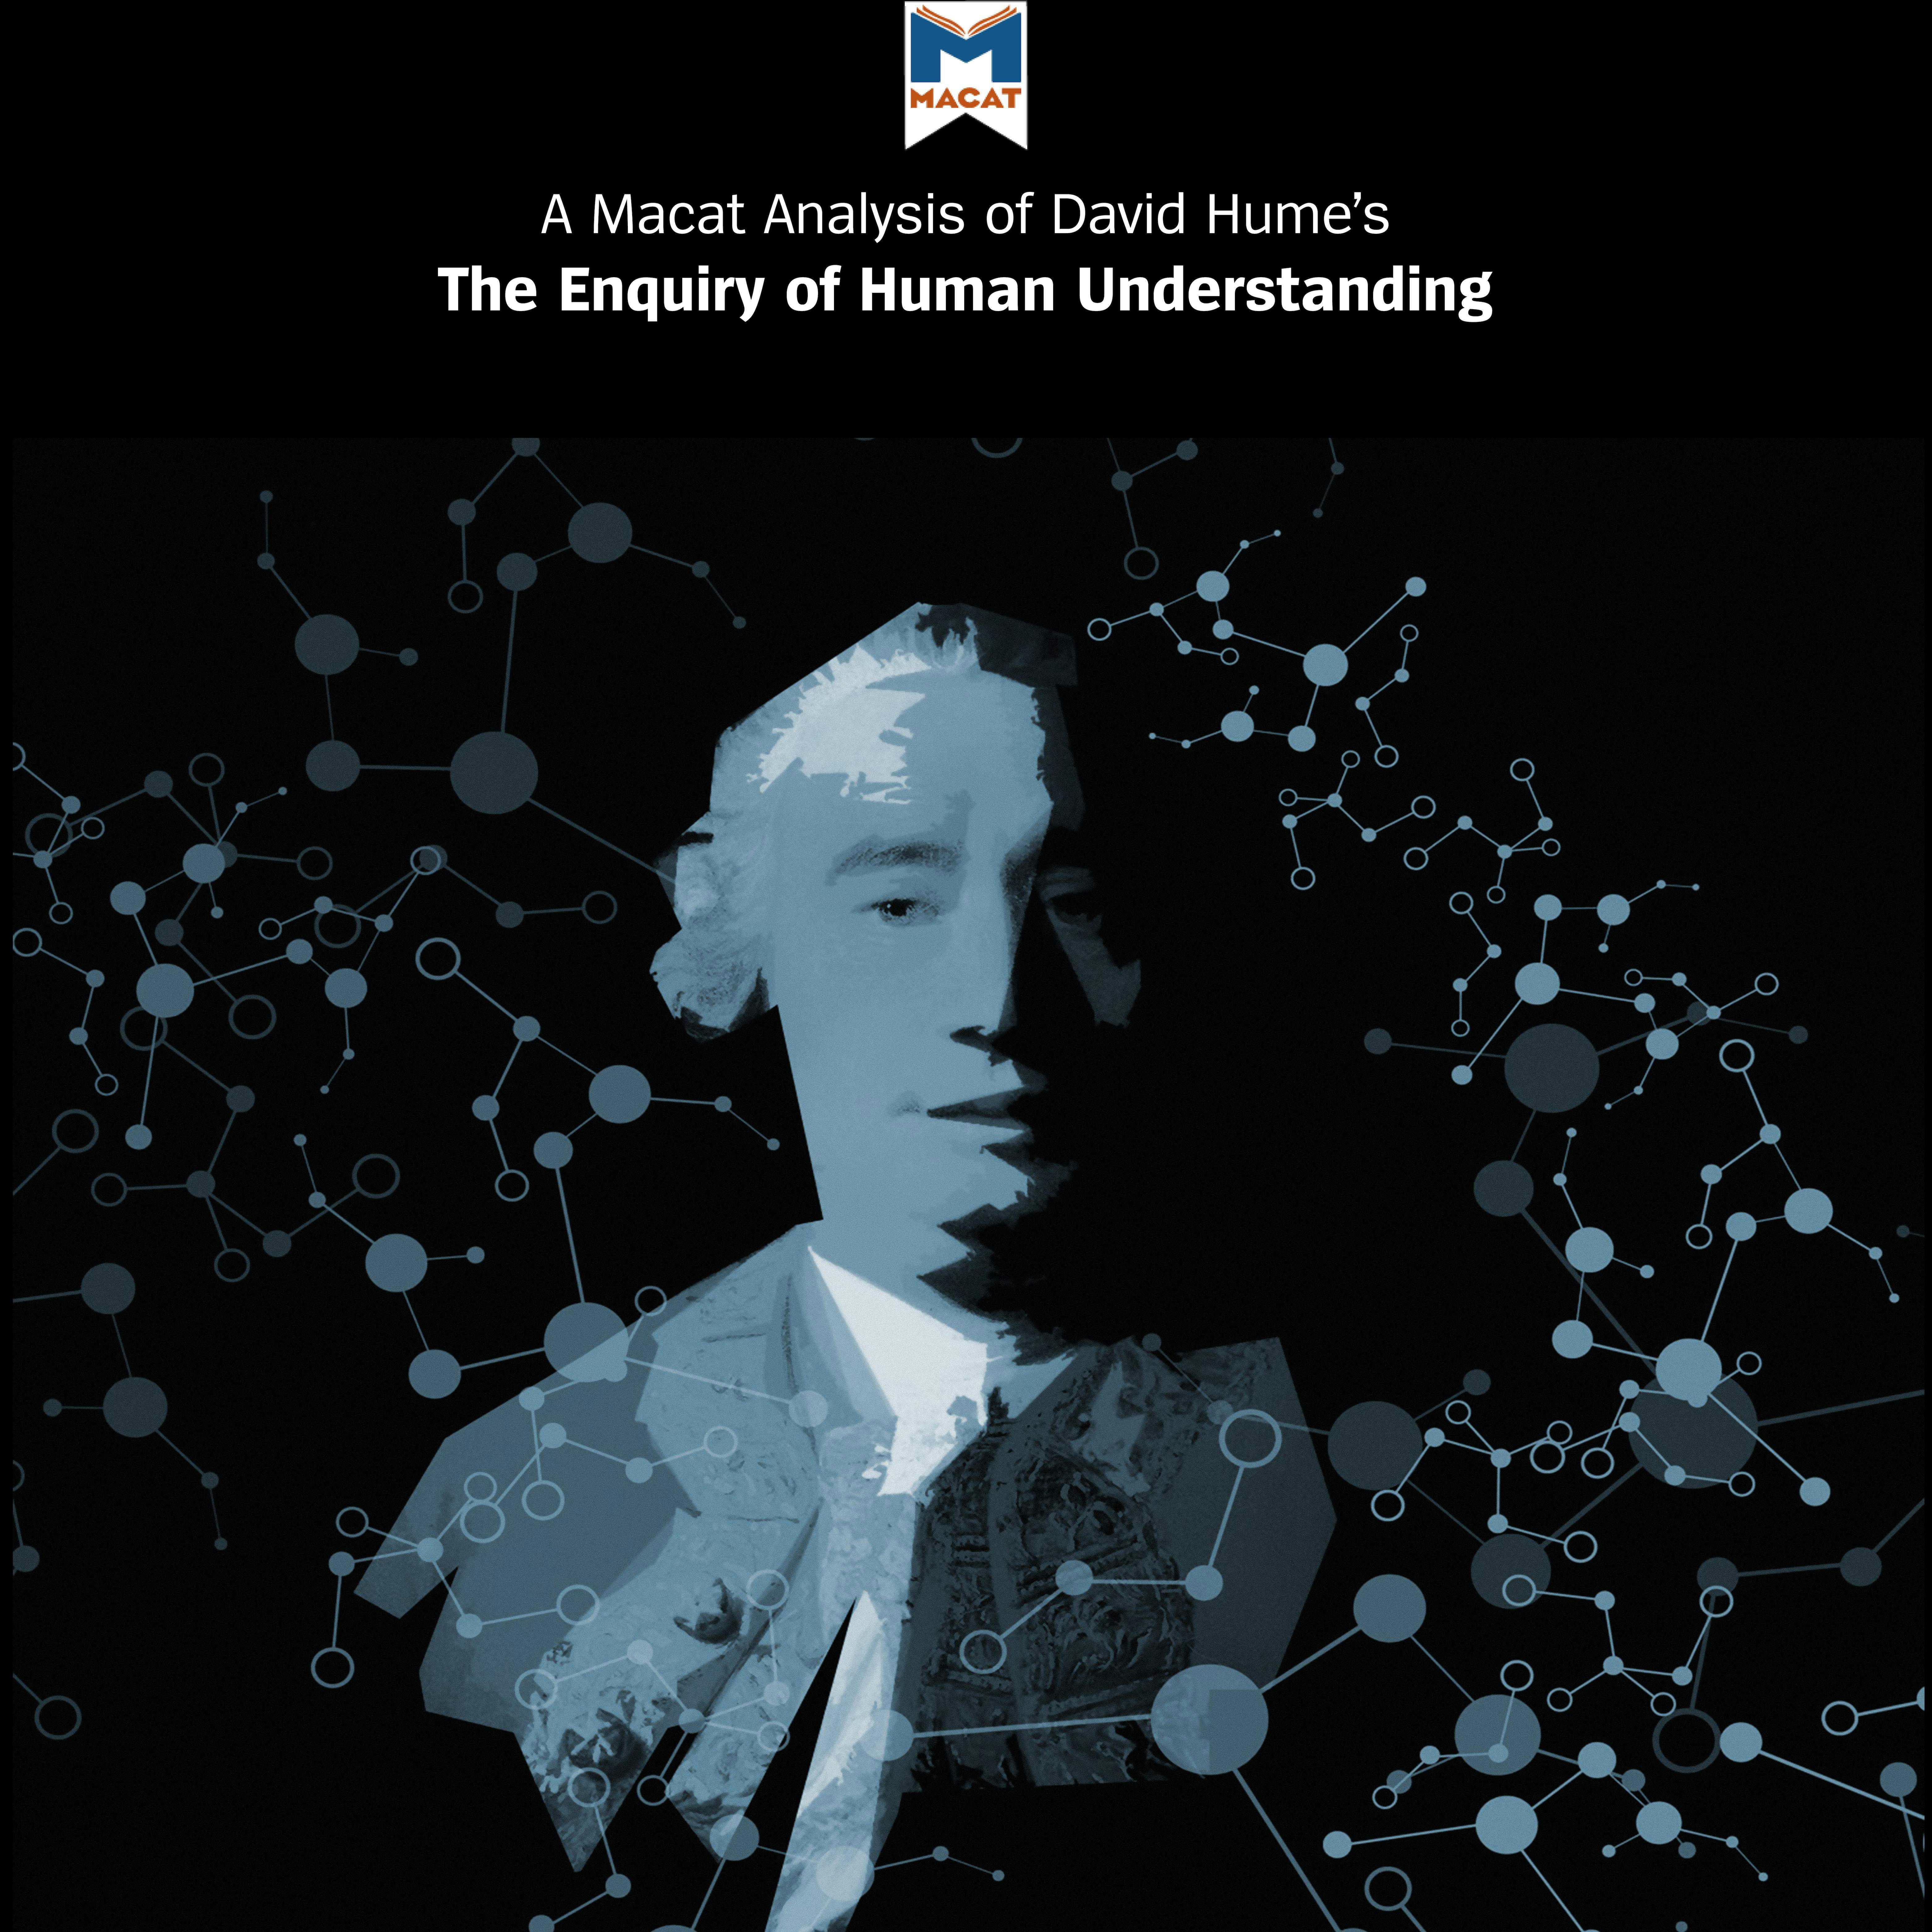 A Macat Analysis of David Hume's An Enquiry Concerning Human Understanding - Michael O’Sullivan